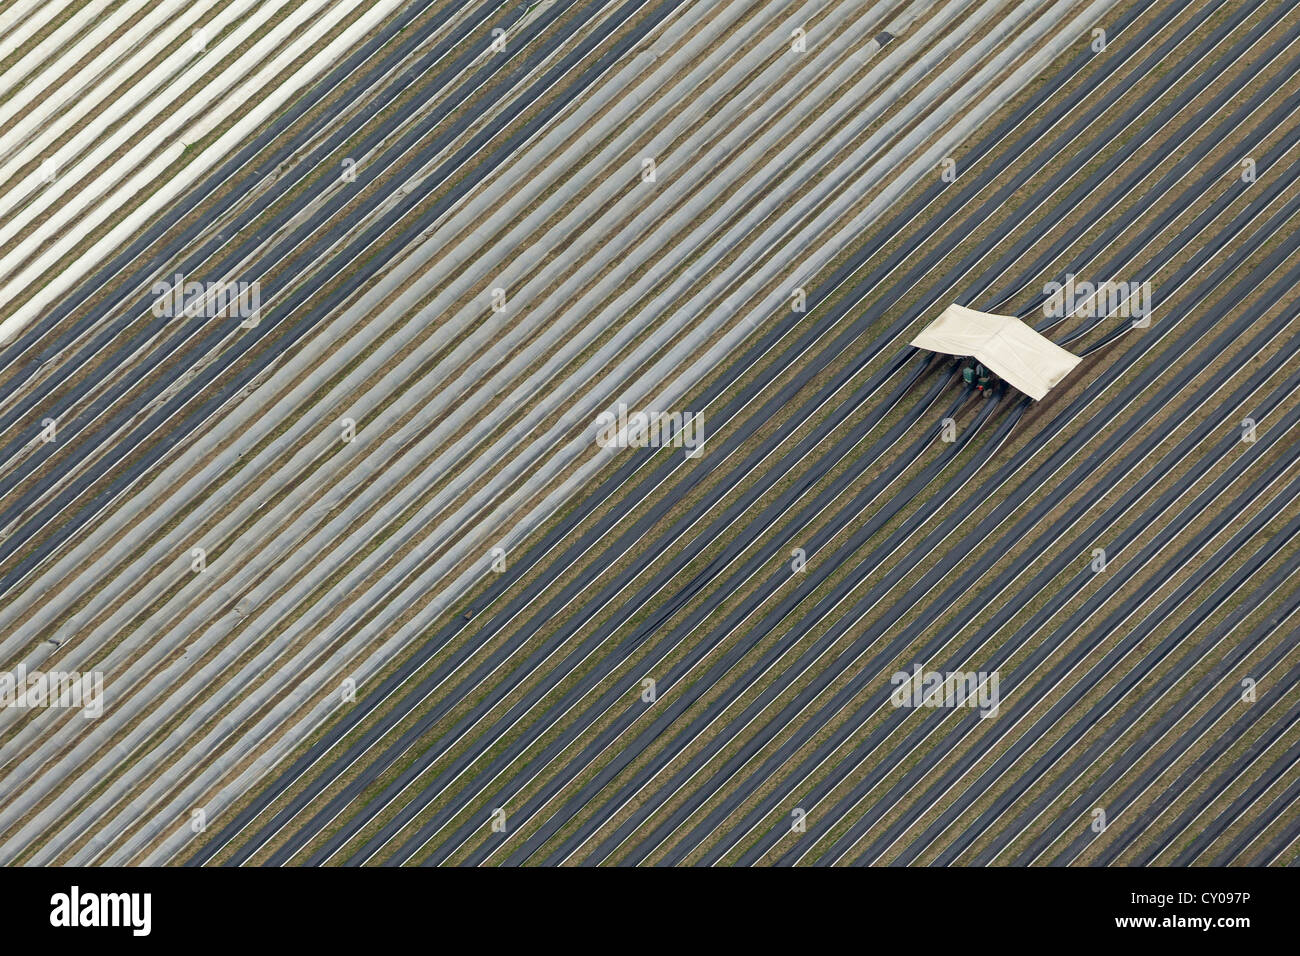 Aerial view, mechanical harvesting of asparagus, asparagus field on Hafenstrasse street, Waltrop, Ruhr area Stock Photo